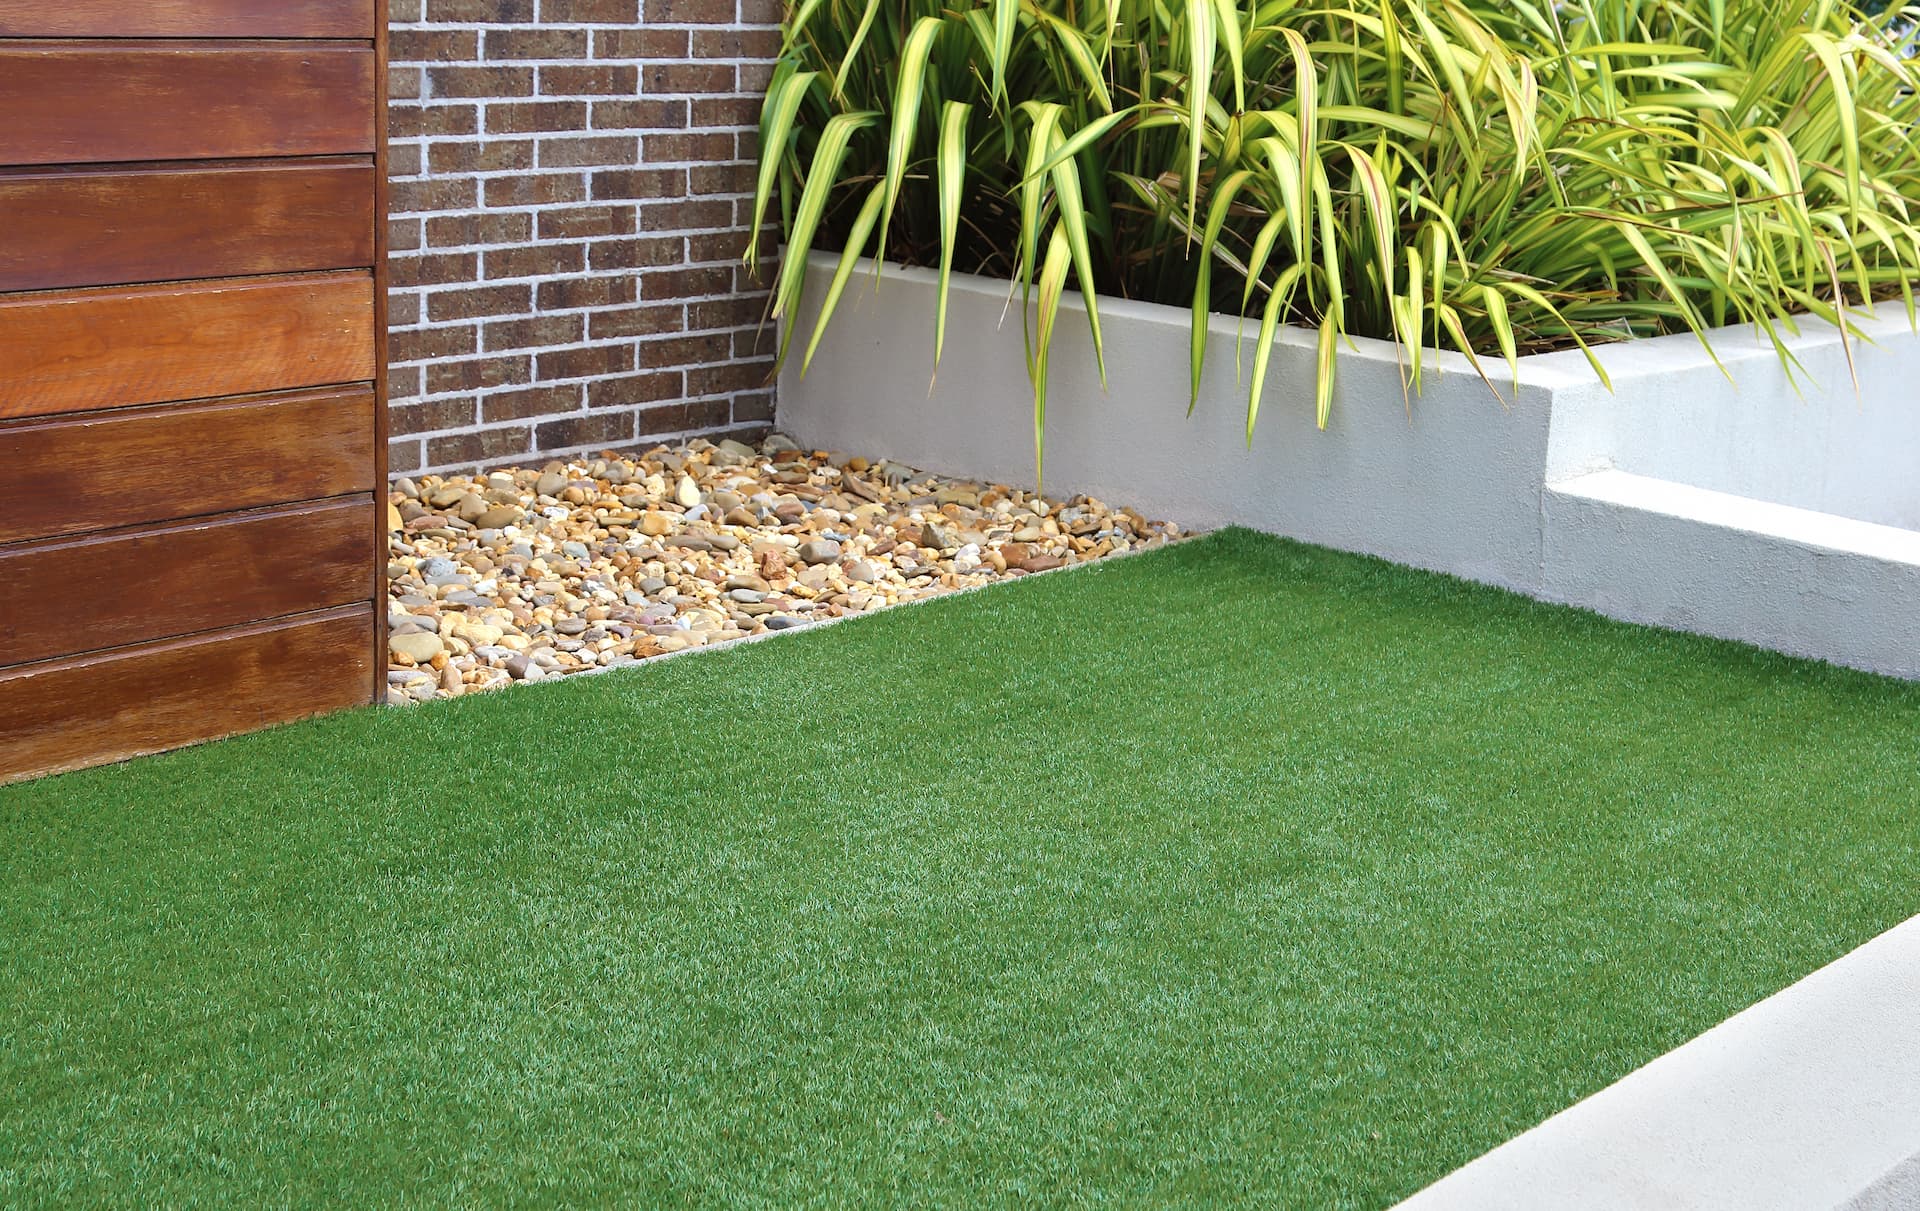 Licenced Artificial Grass & Turf services in Bramhall